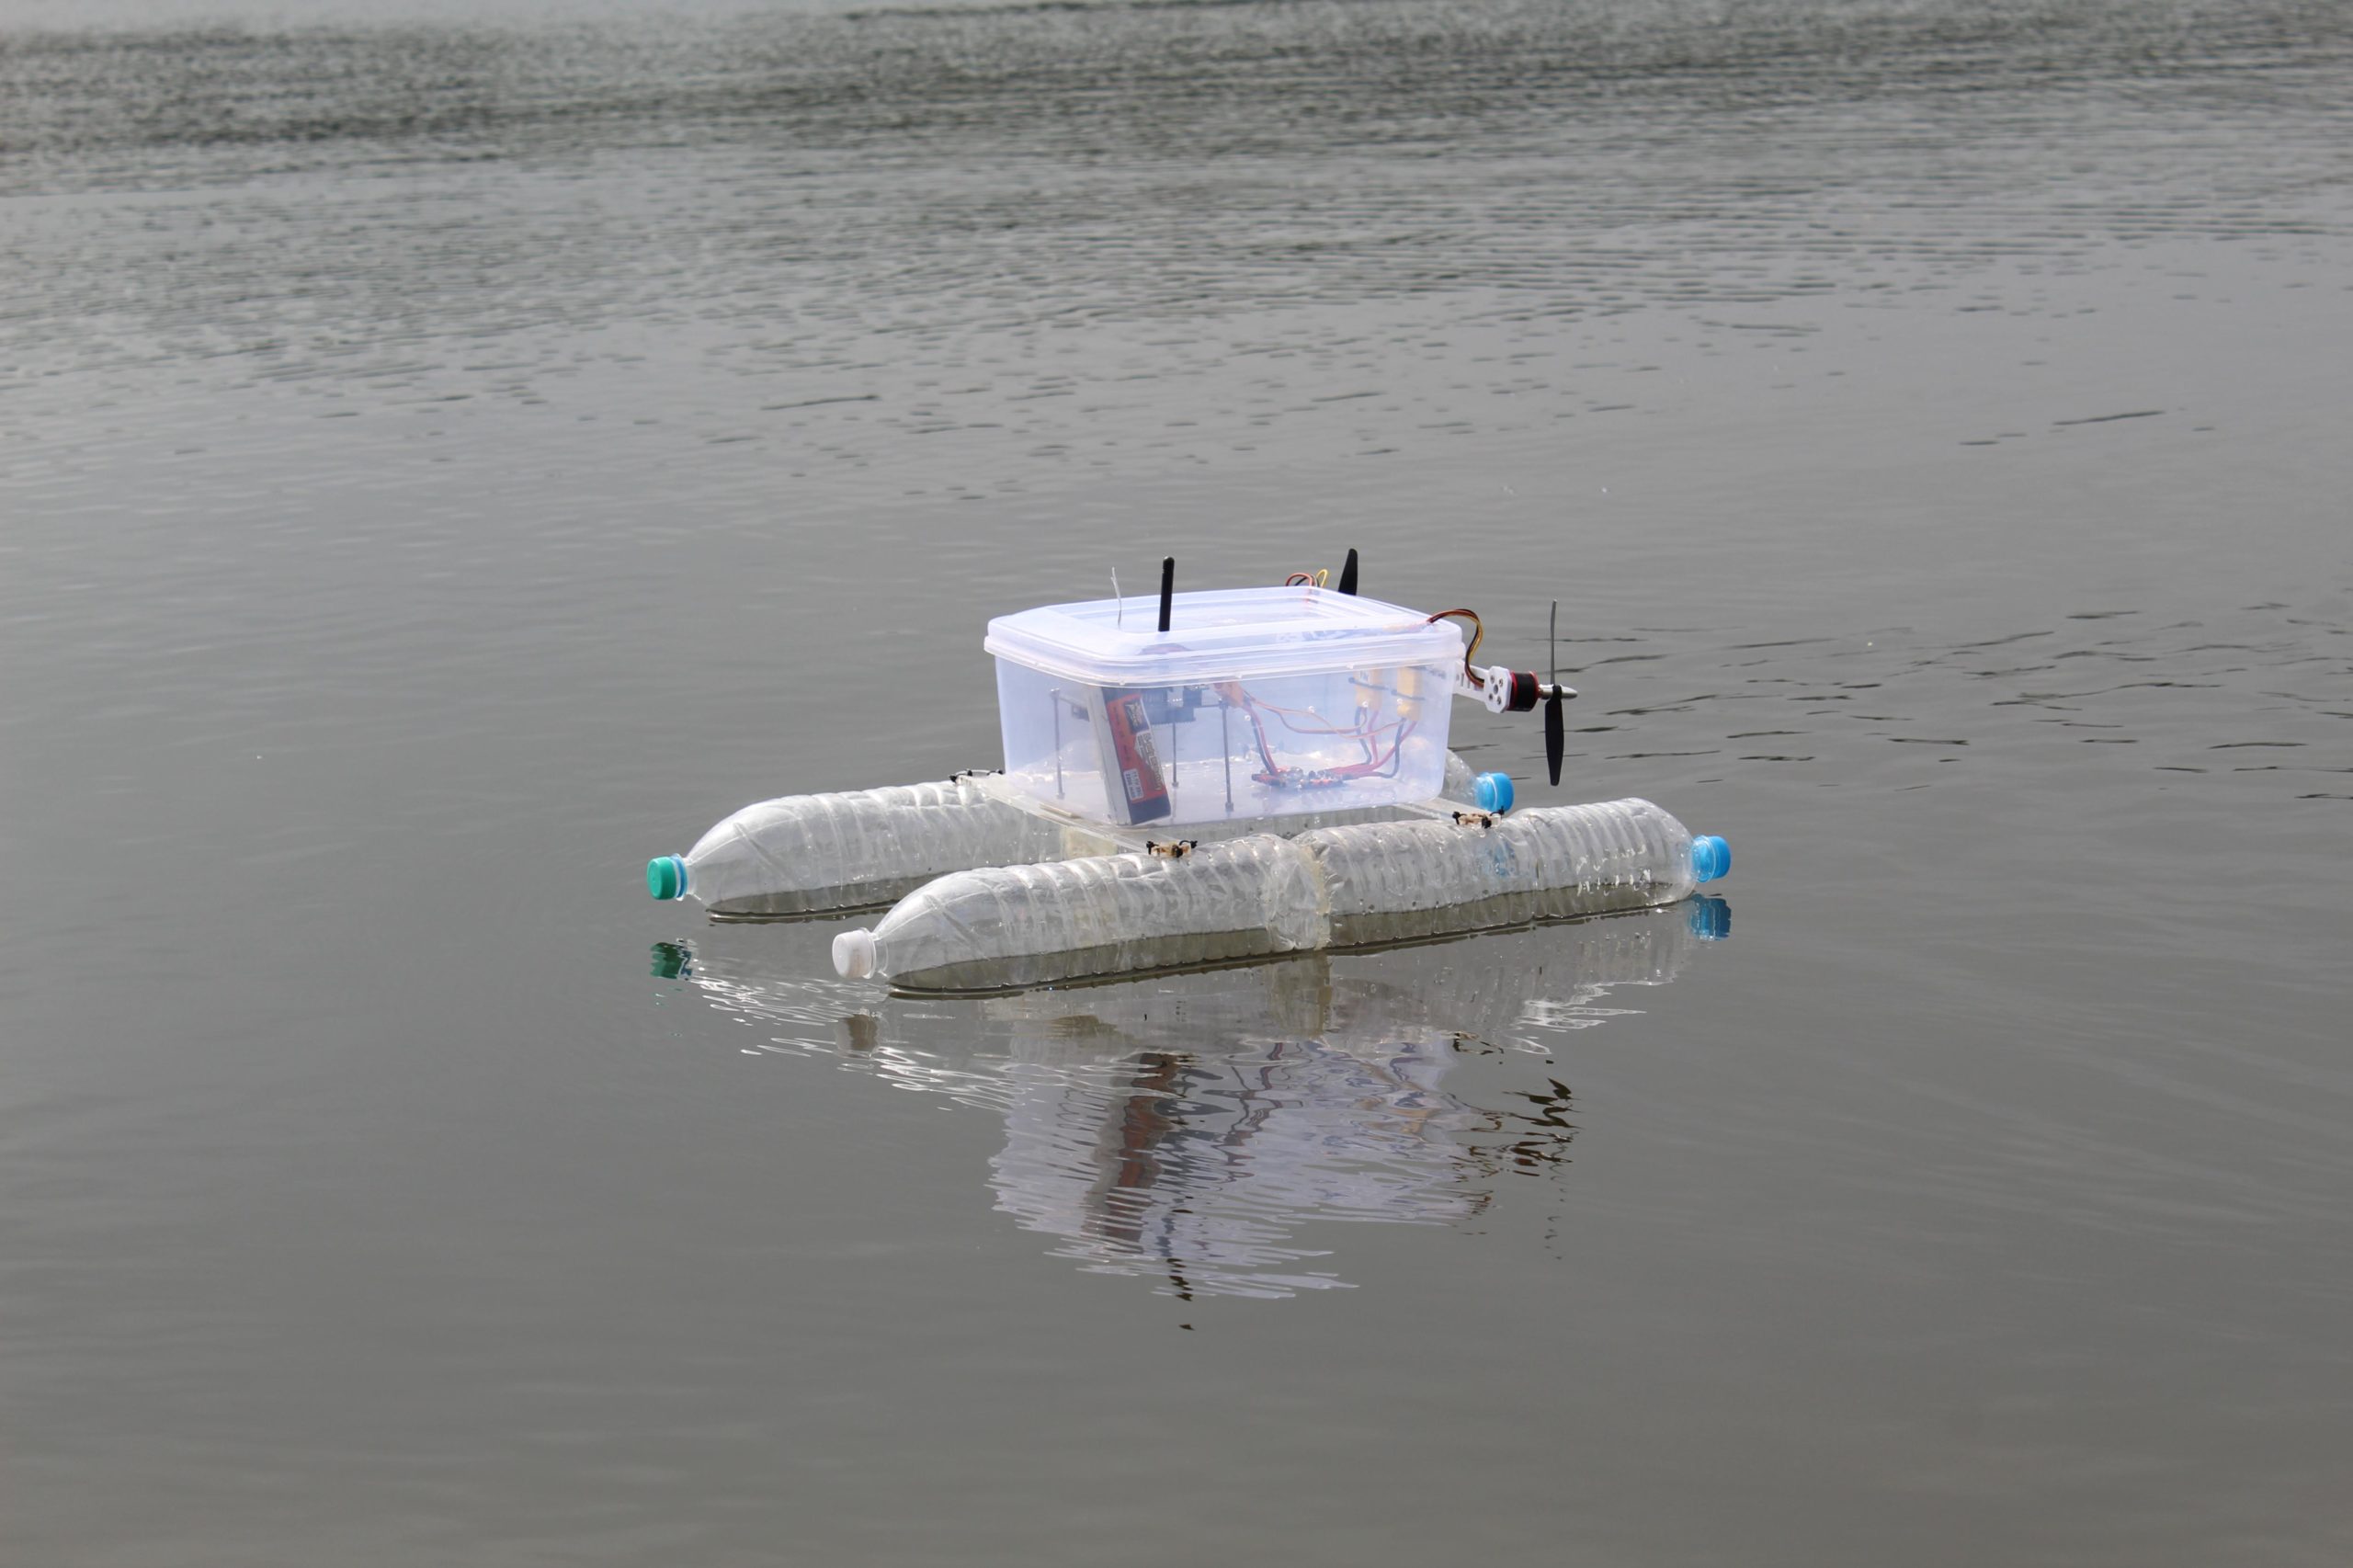 Small-scale autonomous boat made out of recycled water bottles and a Tupperware container